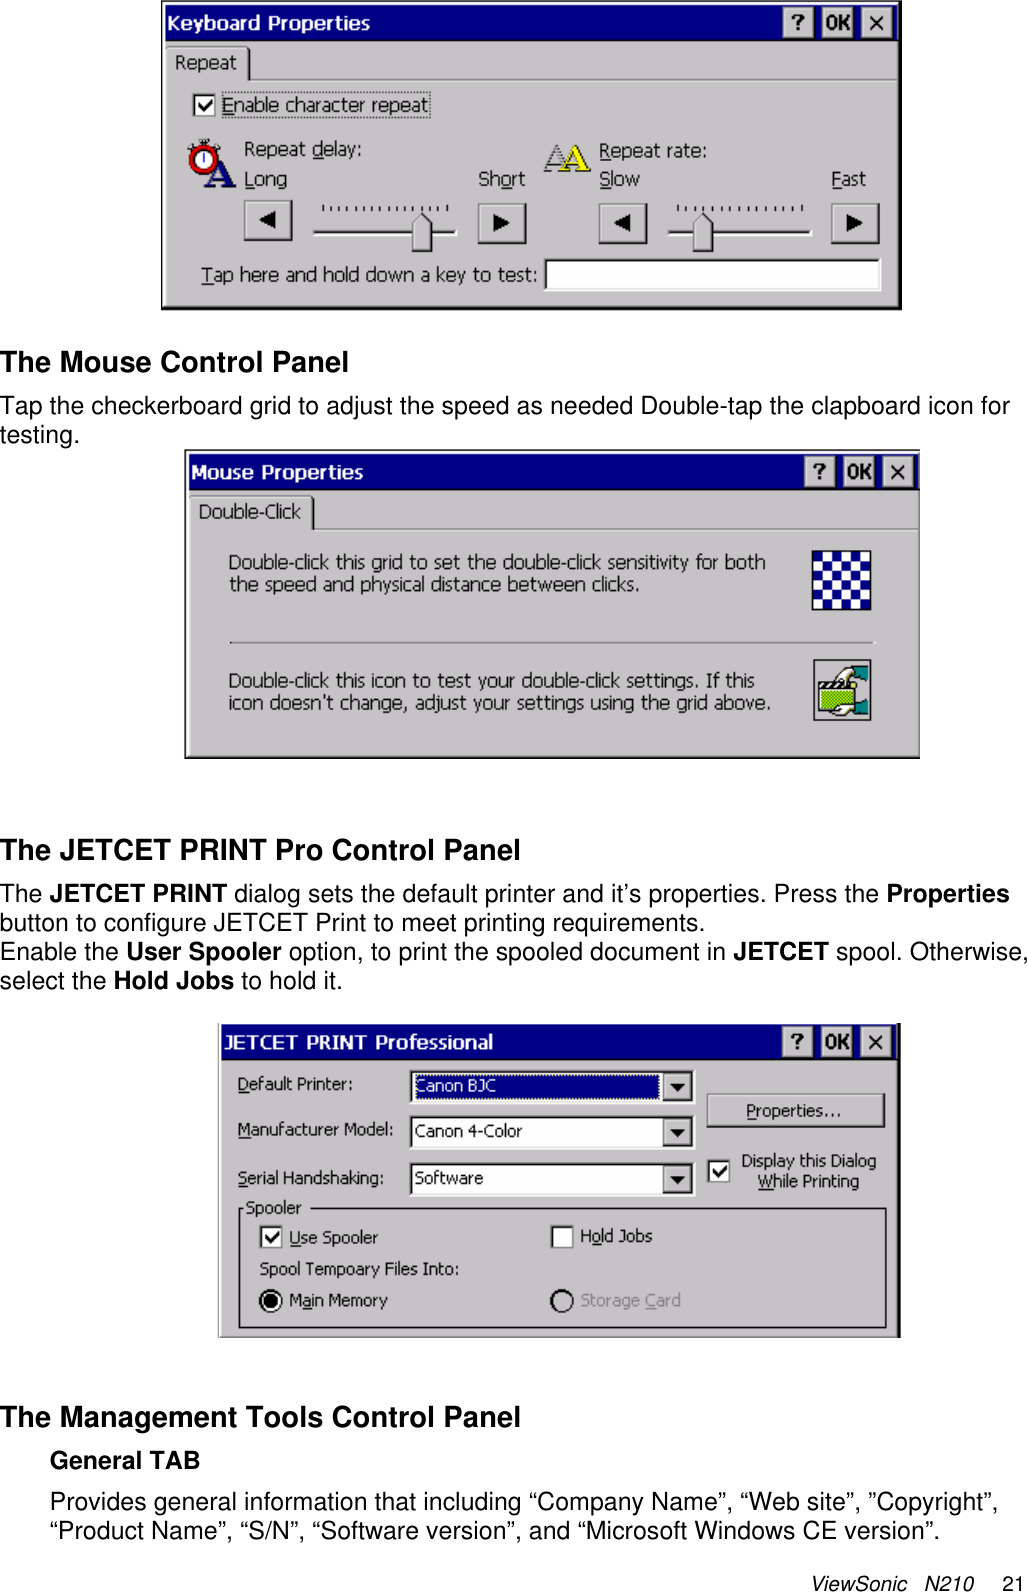 ViewSonic   N210     21   The Mouse Control Panel Tap the checkerboard grid to adjust the speed as needed Double-tap the clapboard icon for testing.    The JETCET PRINT Pro Control Panel The JETCET PRINT dialog sets the default printer and it’s properties. Press the Properties button to configure JETCET Print to meet printing requirements. Enable the User Spooler option, to print the spooled document in JETCET spool. Otherwise, select the Hold Jobs to hold it.      The Management Tools Control Panel General TAB Provides general information that including “Company Name”, “Web site”, ”Copyright”, “Product Name”, “S/N”, “Software version”, and “Microsoft Windows CE version”. 